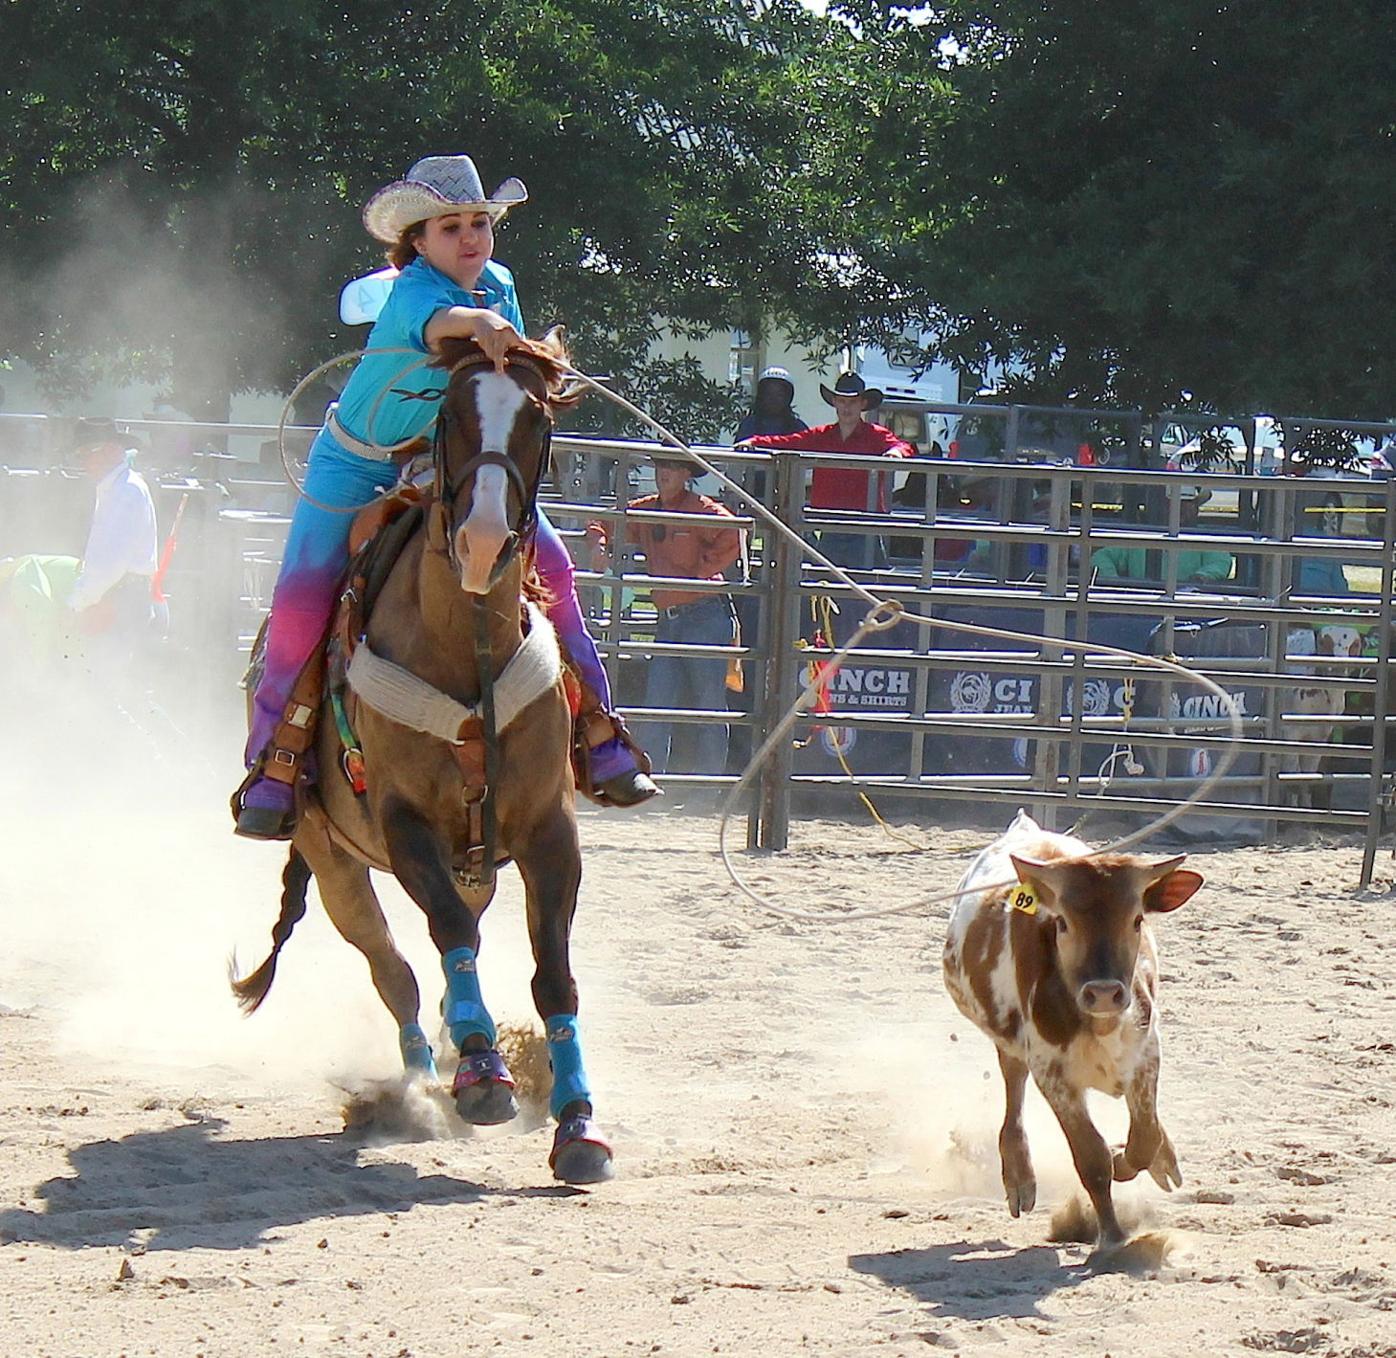 Maryland High School Rodeo comes to Tuckahoe News